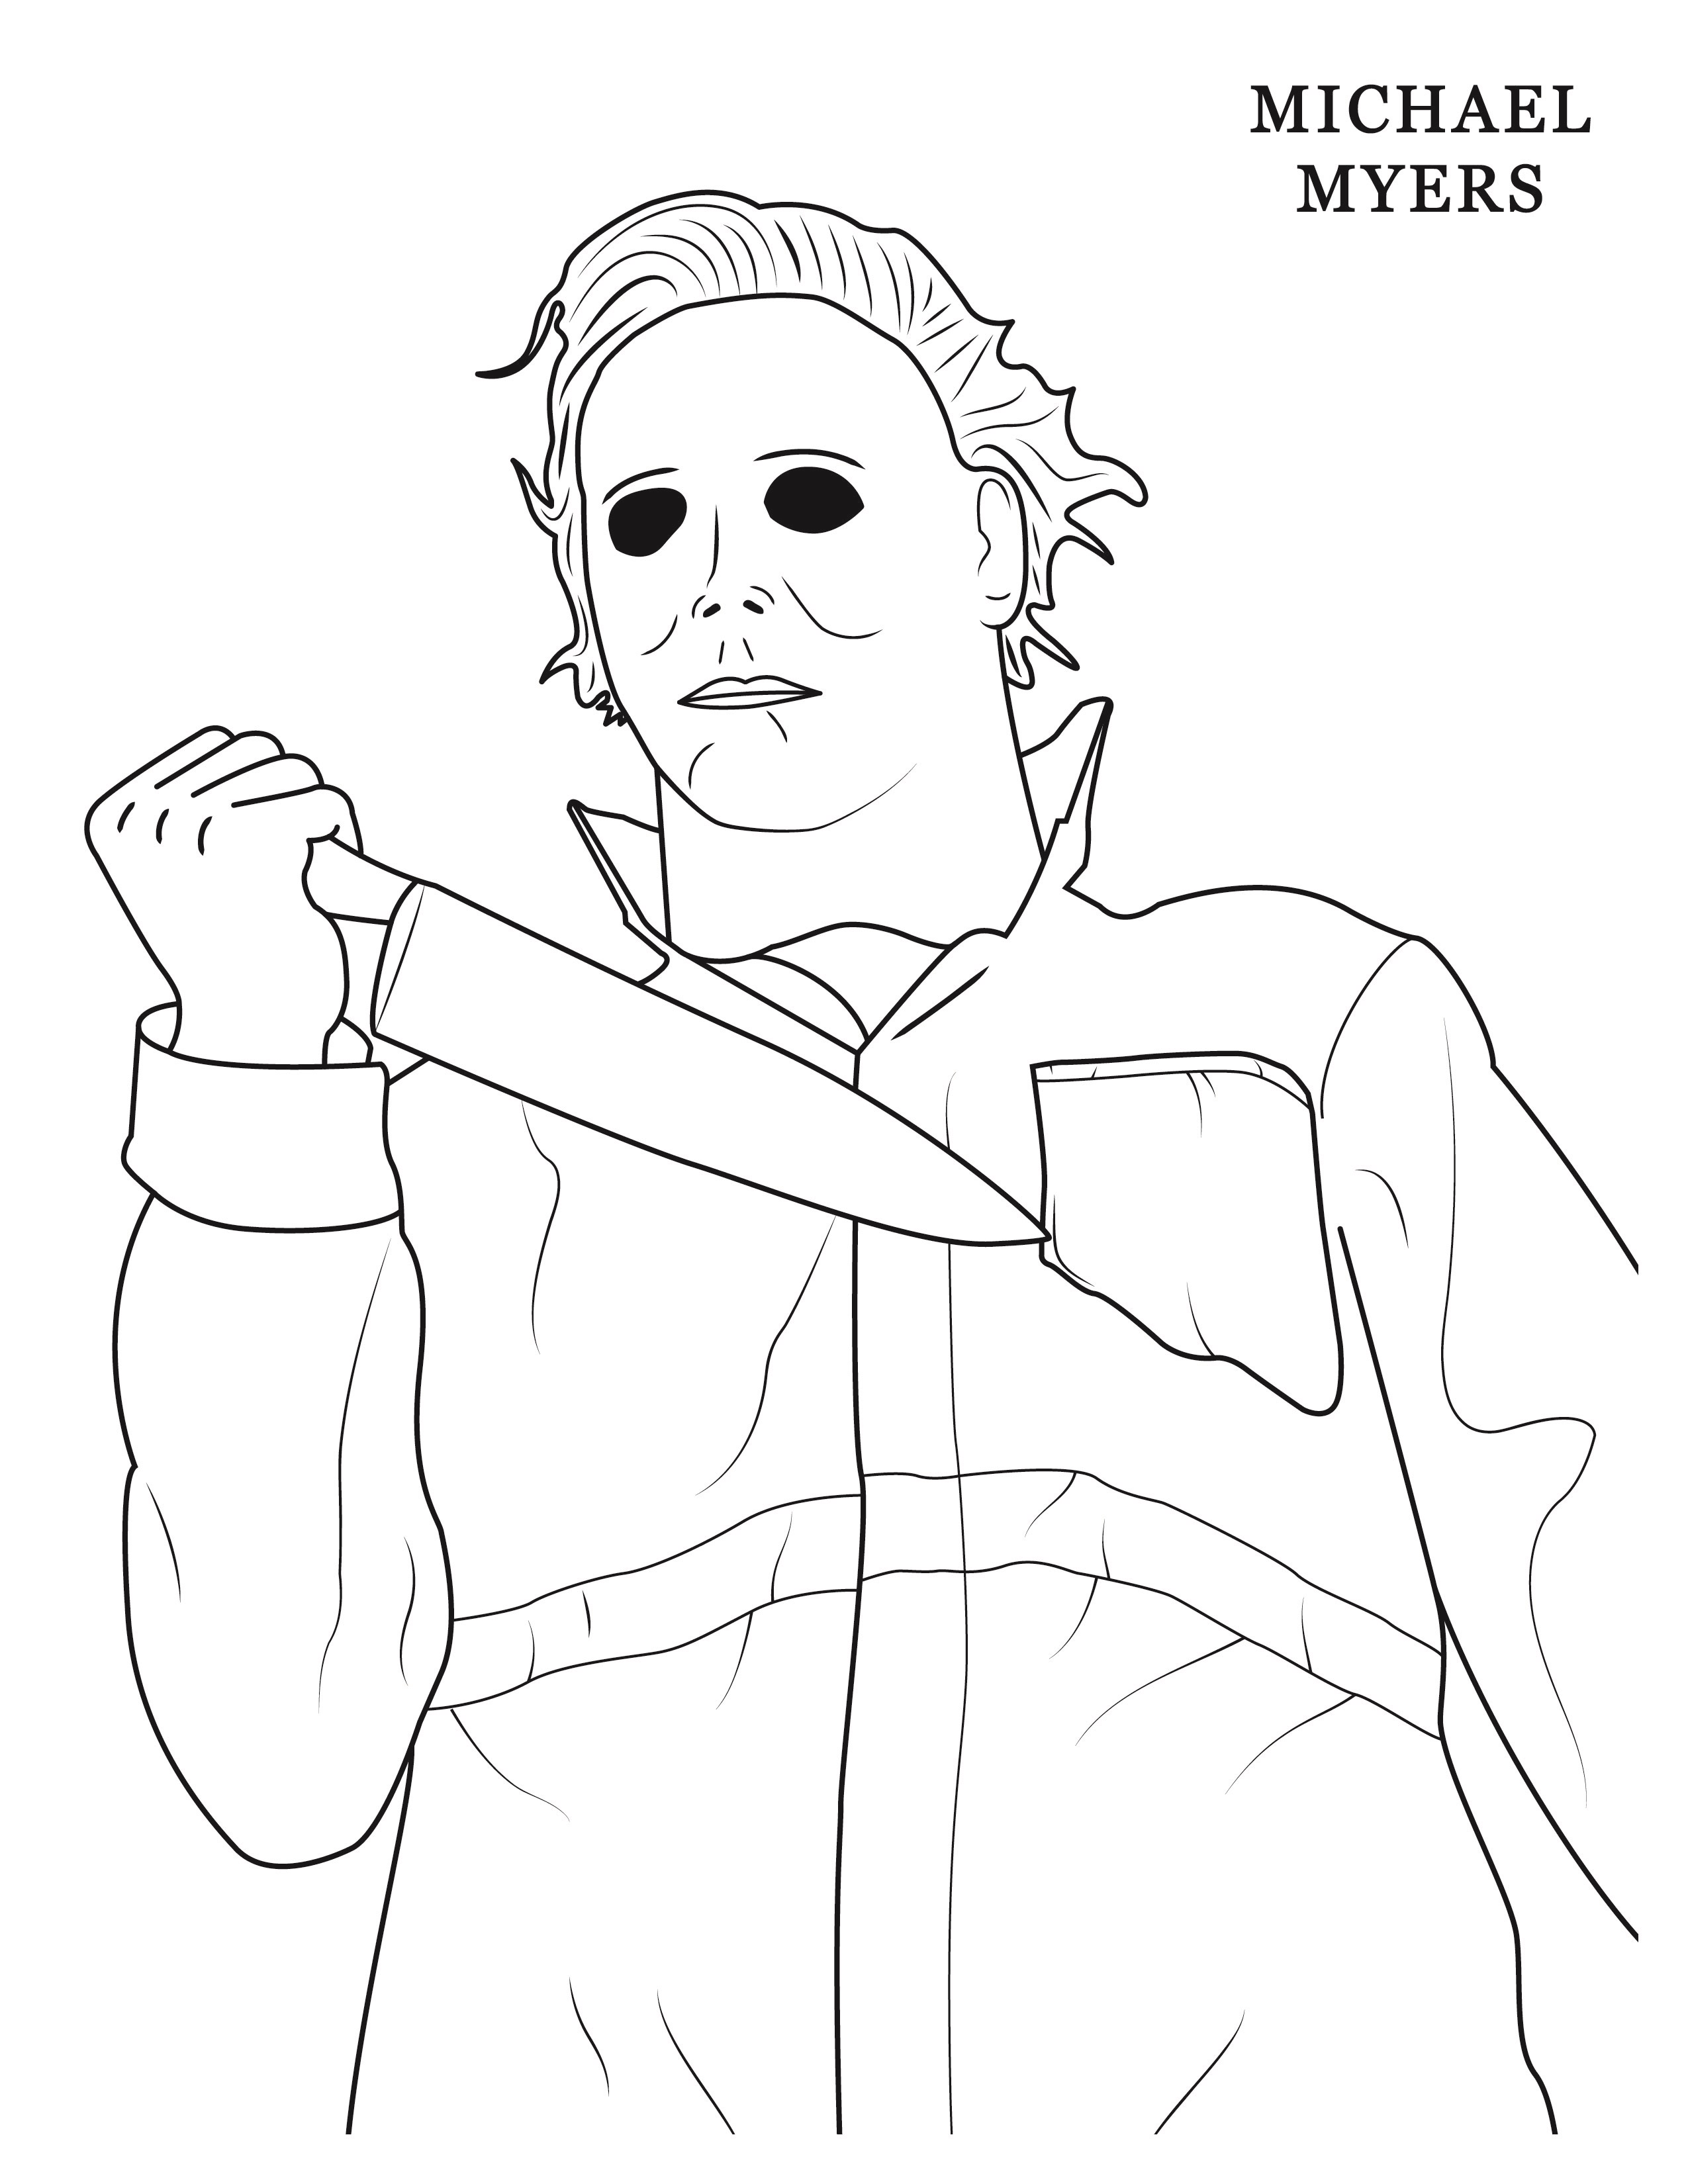 Michael Myers Coloring Pages - Michael Myers Coloring Pages